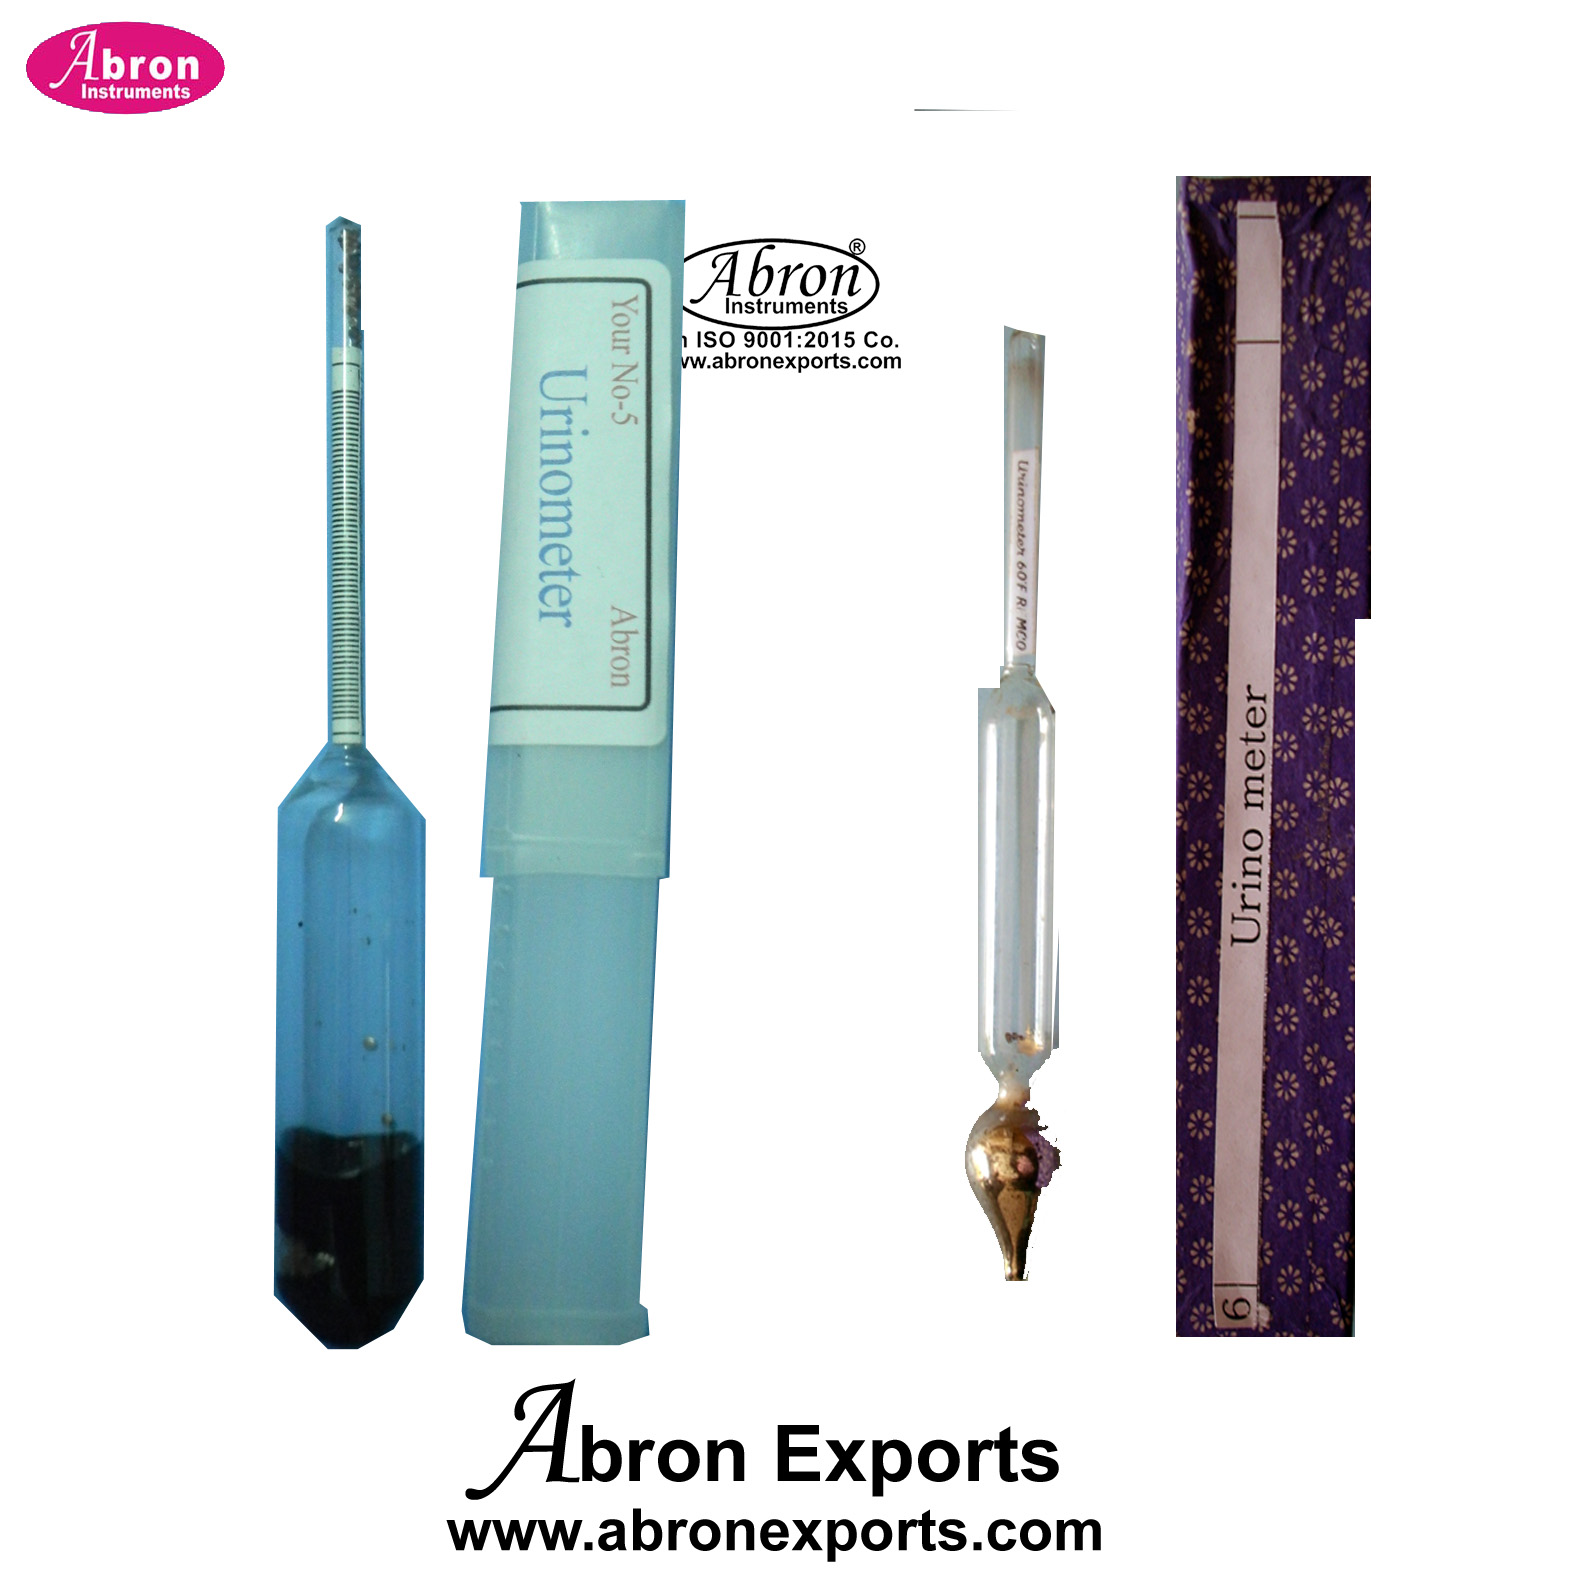 Urinometers glass in case Urine specific gravity meter tester 1000 to 1060  Abron Hydrometer  AP-687-1166 ABM-2790U Hospital Nursing Home Medical Clinical Path Lab Abron.